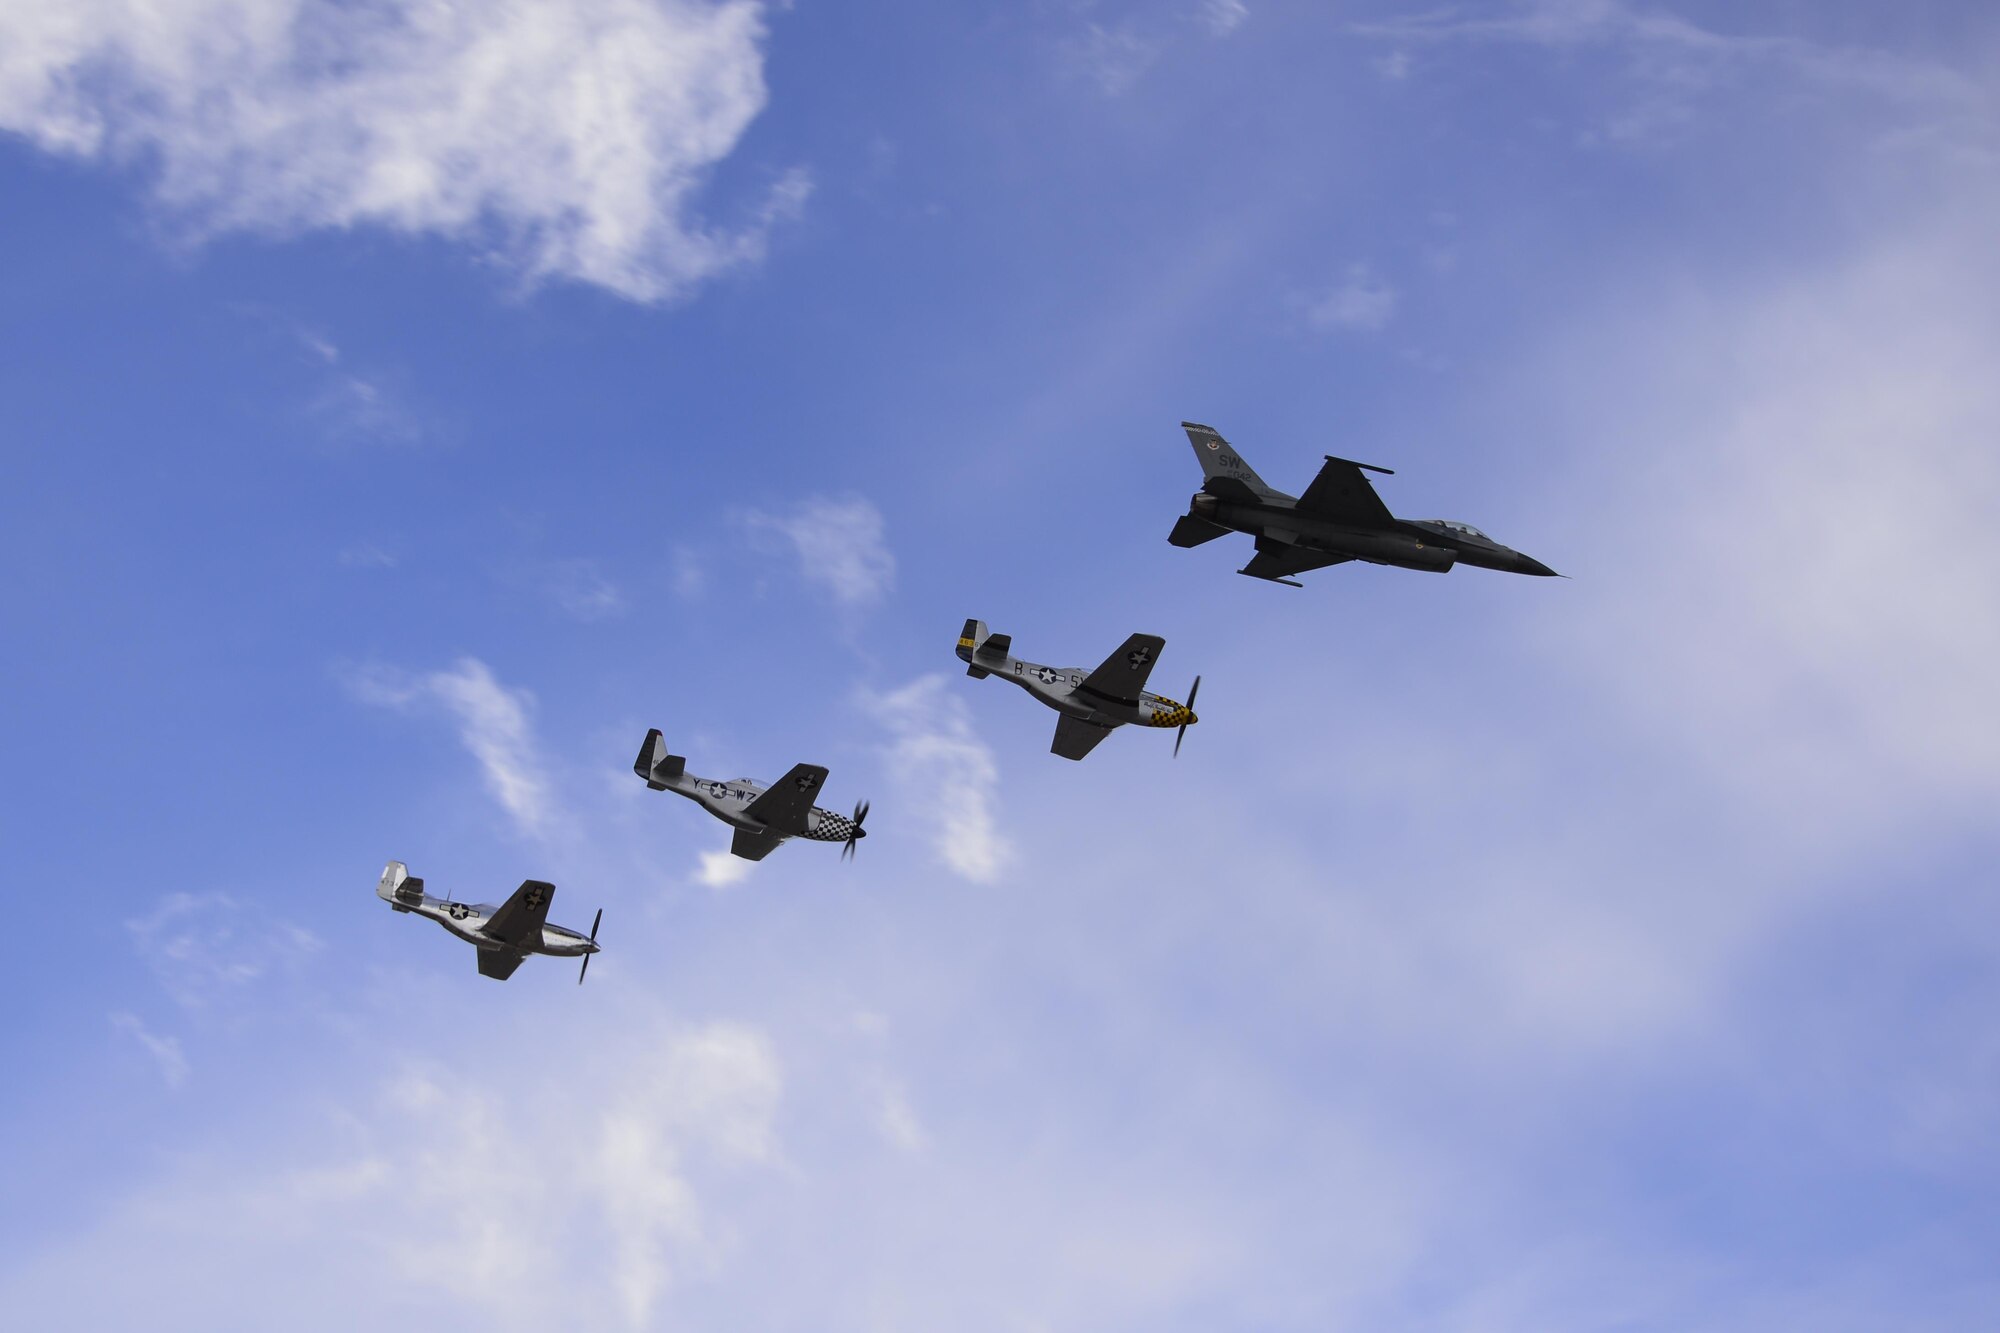 A U.S. Air Force F-16C Fighting Falcon, A TF-51 Mustang and two P-51 Mustangs fly in formation during the 2017 Heritage Flight Training and Certification Course at Davis-Monthan Air Force Base, Ariz., Feb. 12, 2017.  During the course, aircrews practice ground and flight training to enable civilian pilots of historic military aircraft and U.S. Air Force pilots of current fighter aircraft to fly safely in formations together. (U.S. Air Force photo by Senior Airman Betty R. Chevalier)